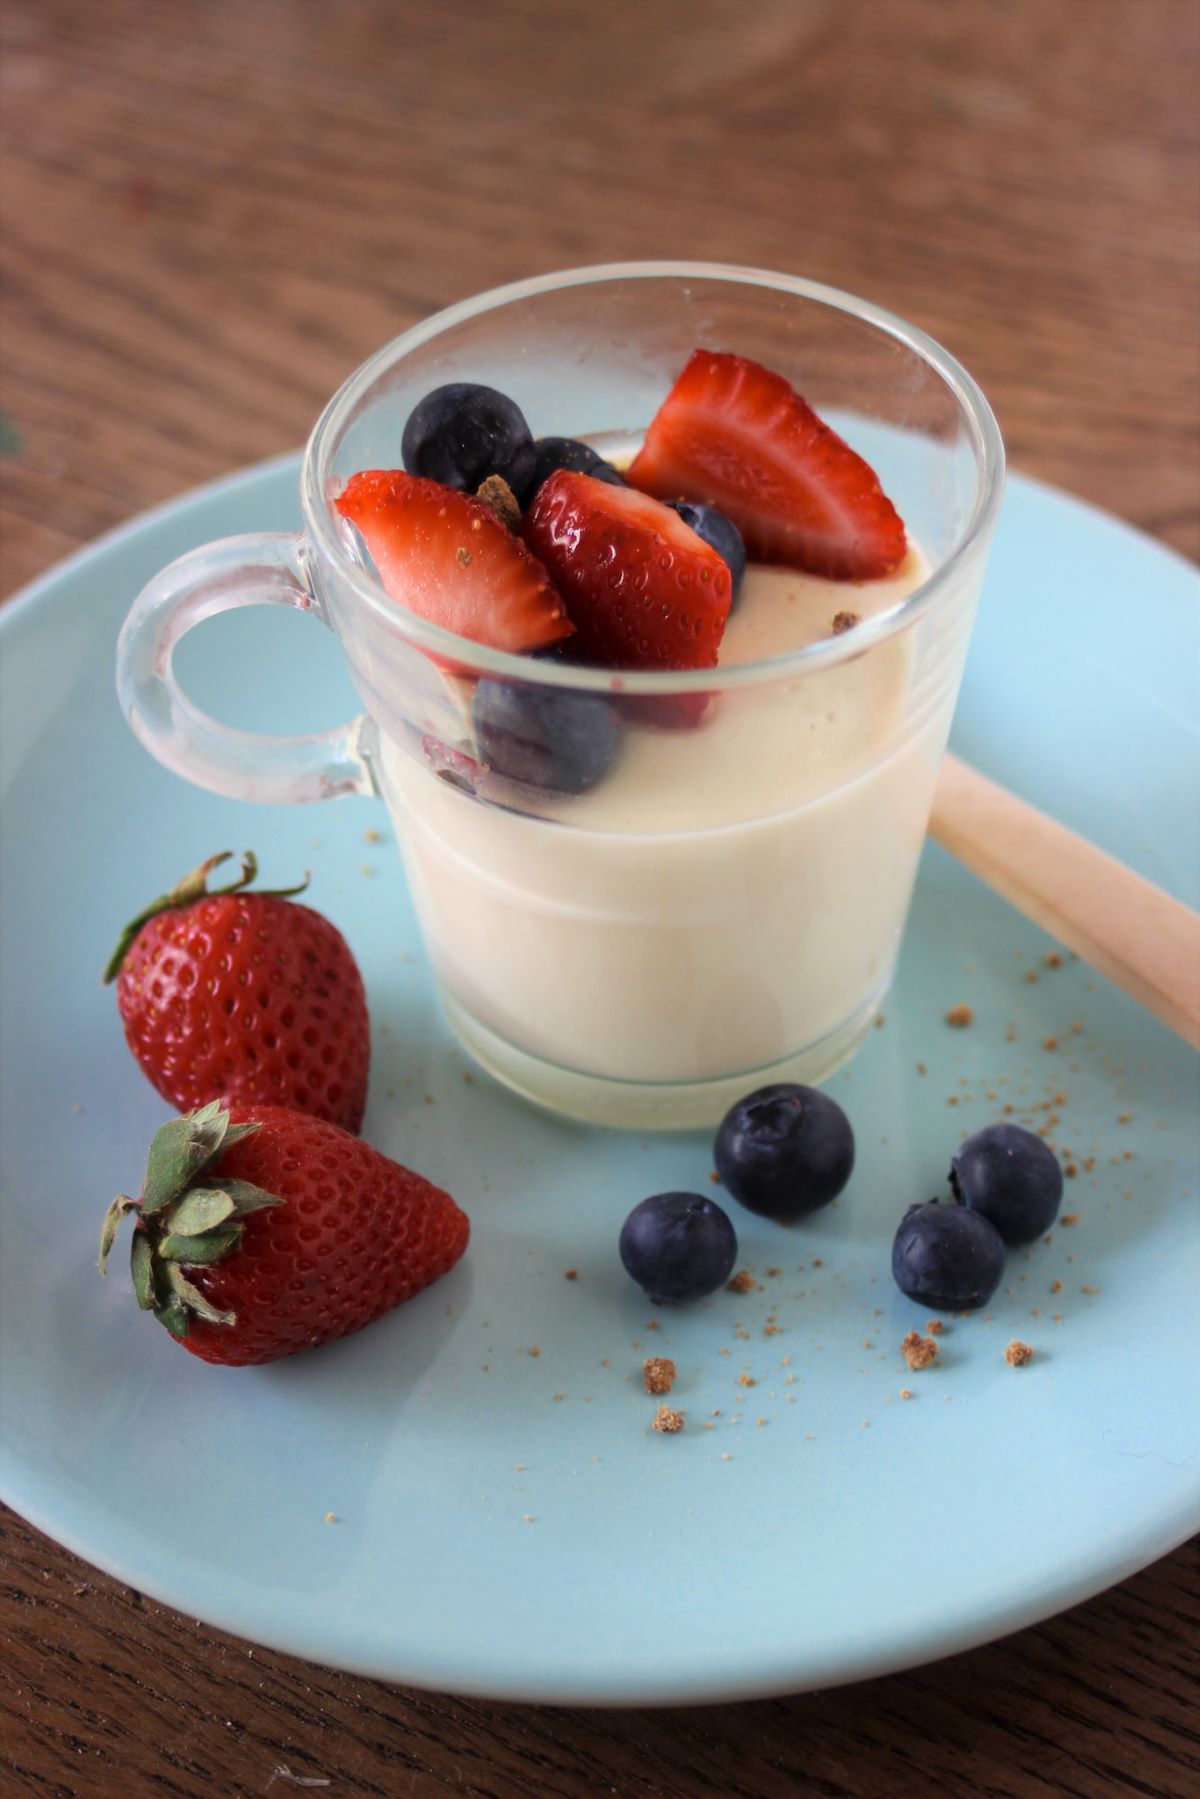 Glass cup with vanilla panna cotta, strawberries, and blueberries on a light blue plate.